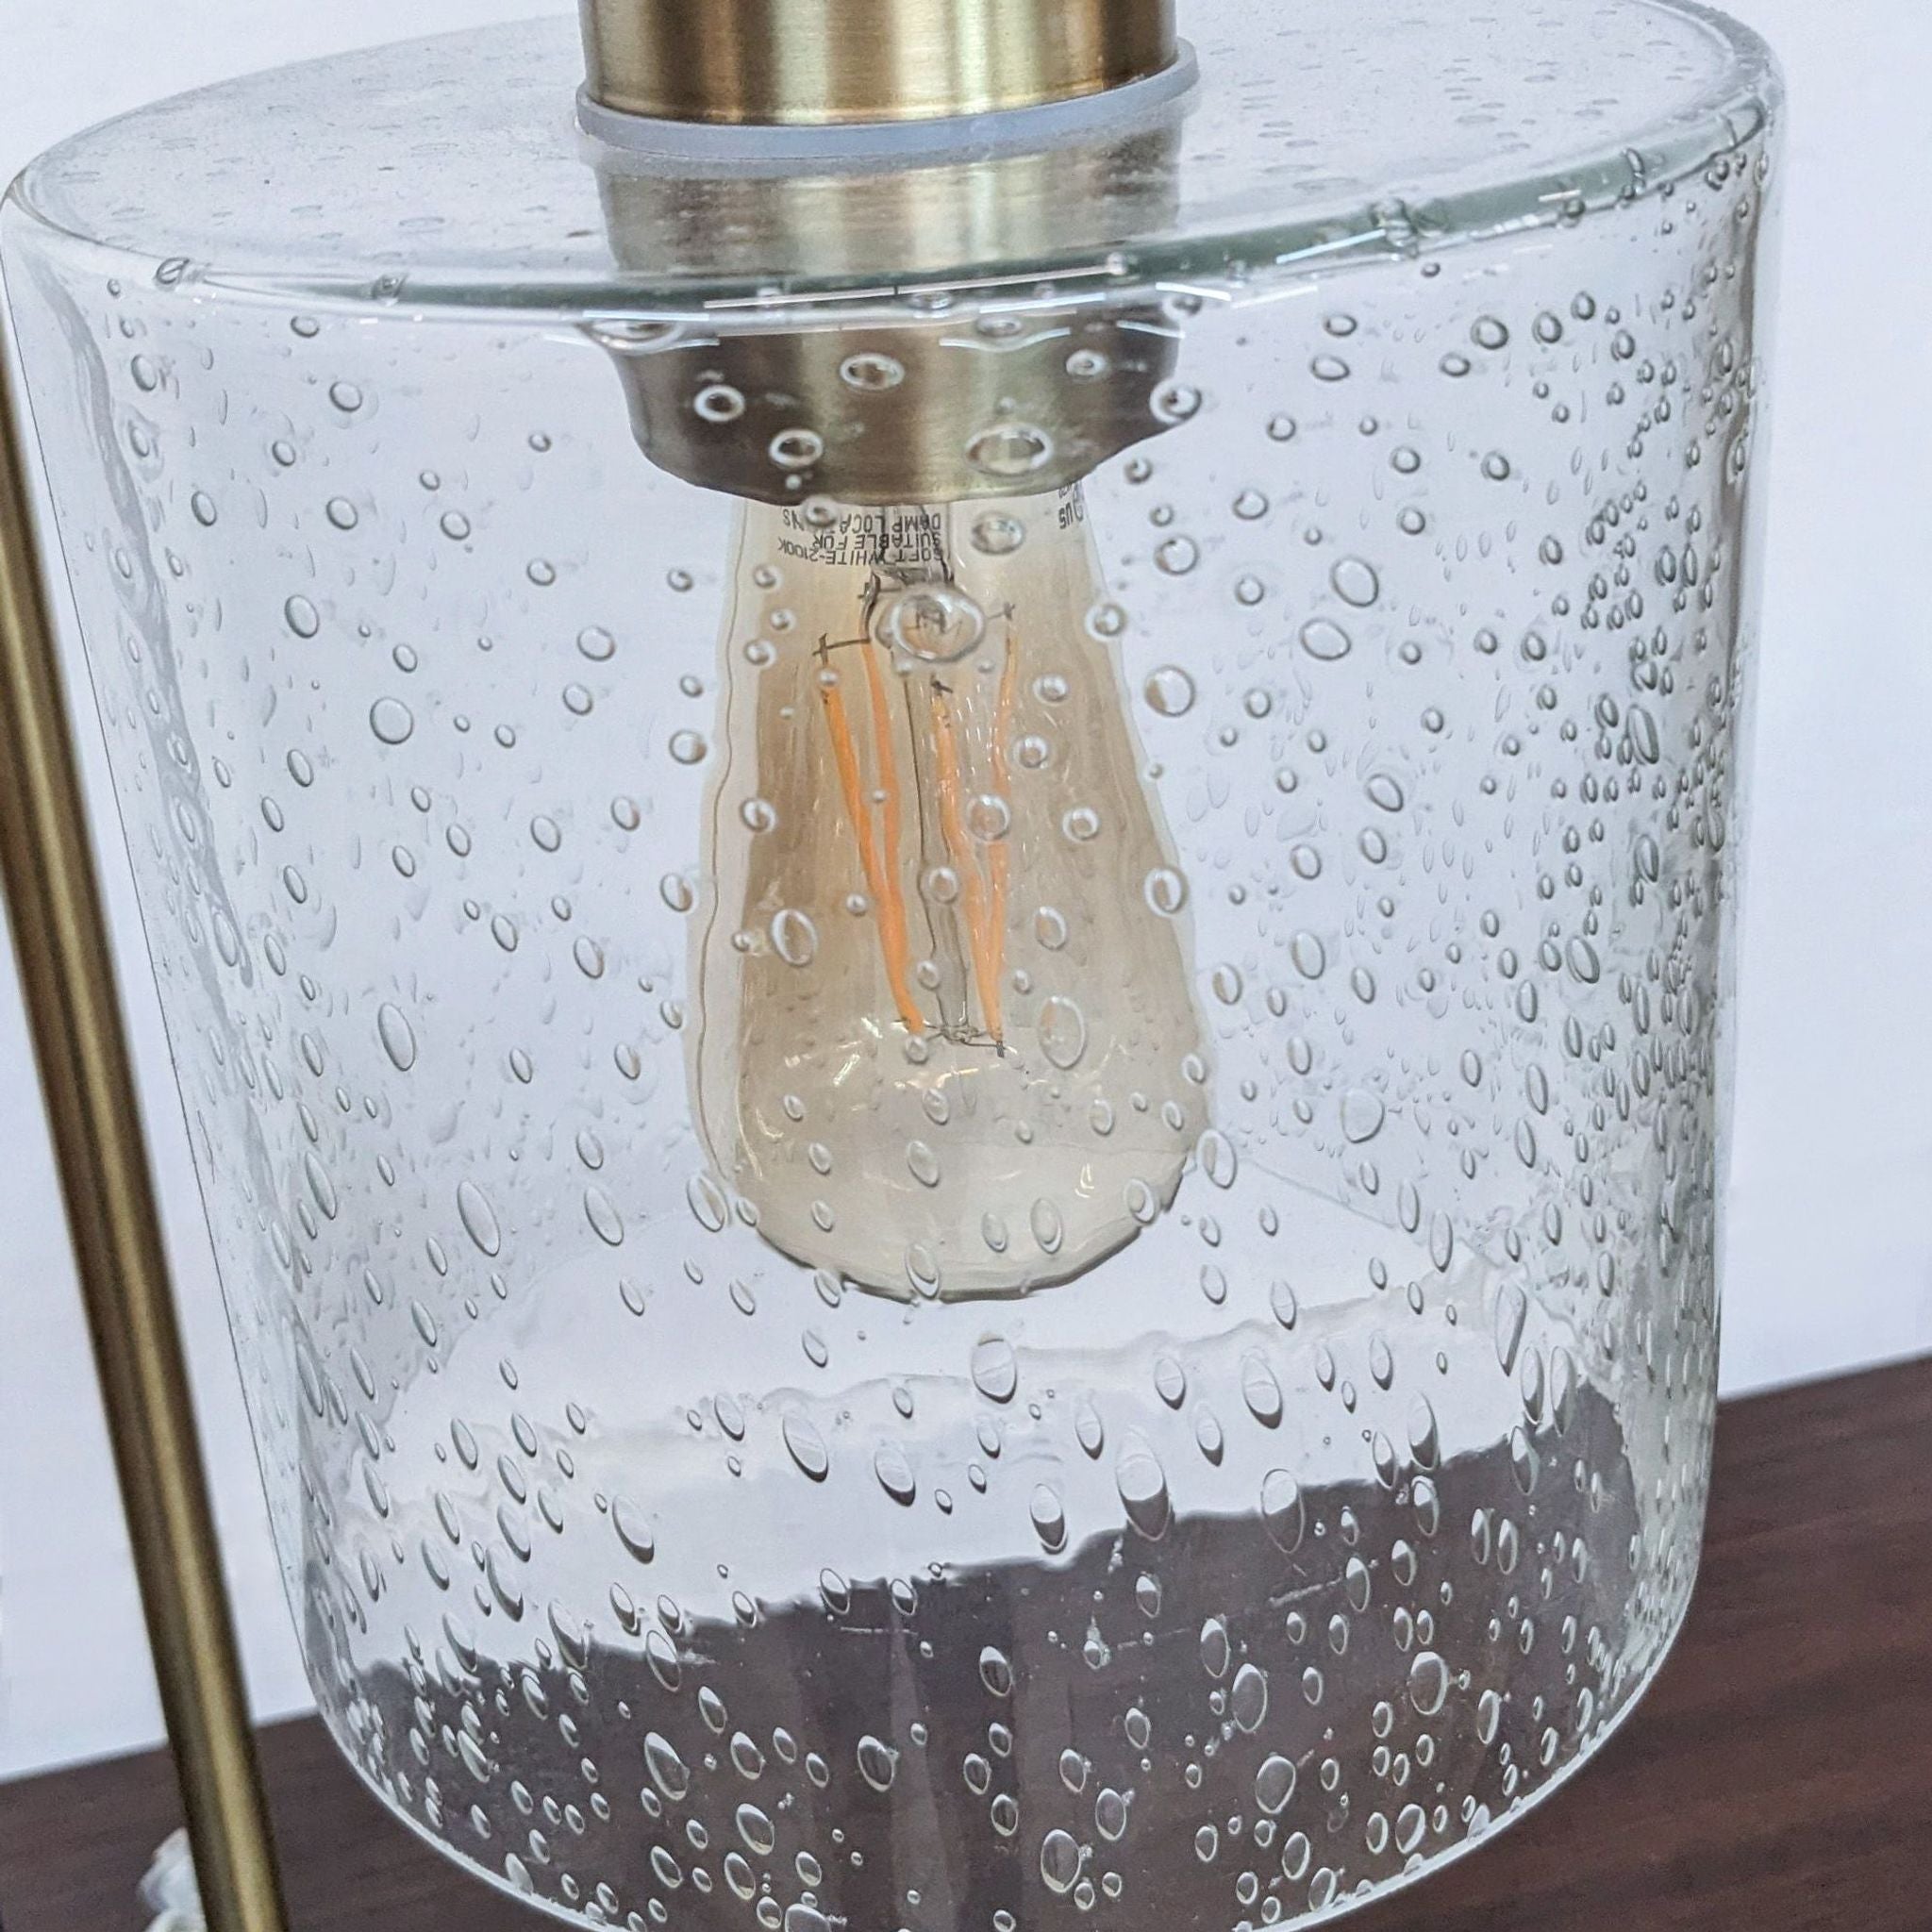 Close-up of Reperch lamp's clear glass shade with water droplet effect and visible bulb, highlighting texture details.